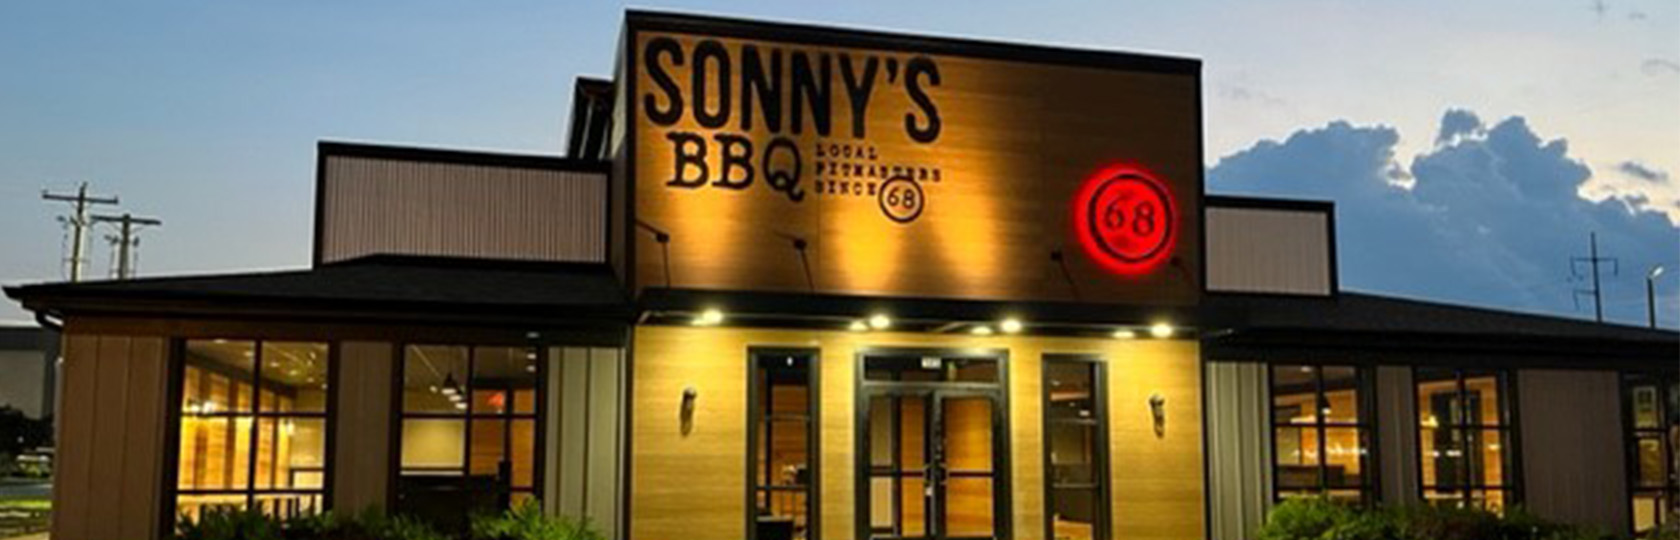 New Sonny's BBQ Coming Soon to Bowling Green%%page%% %%sep%% %%sitename%%